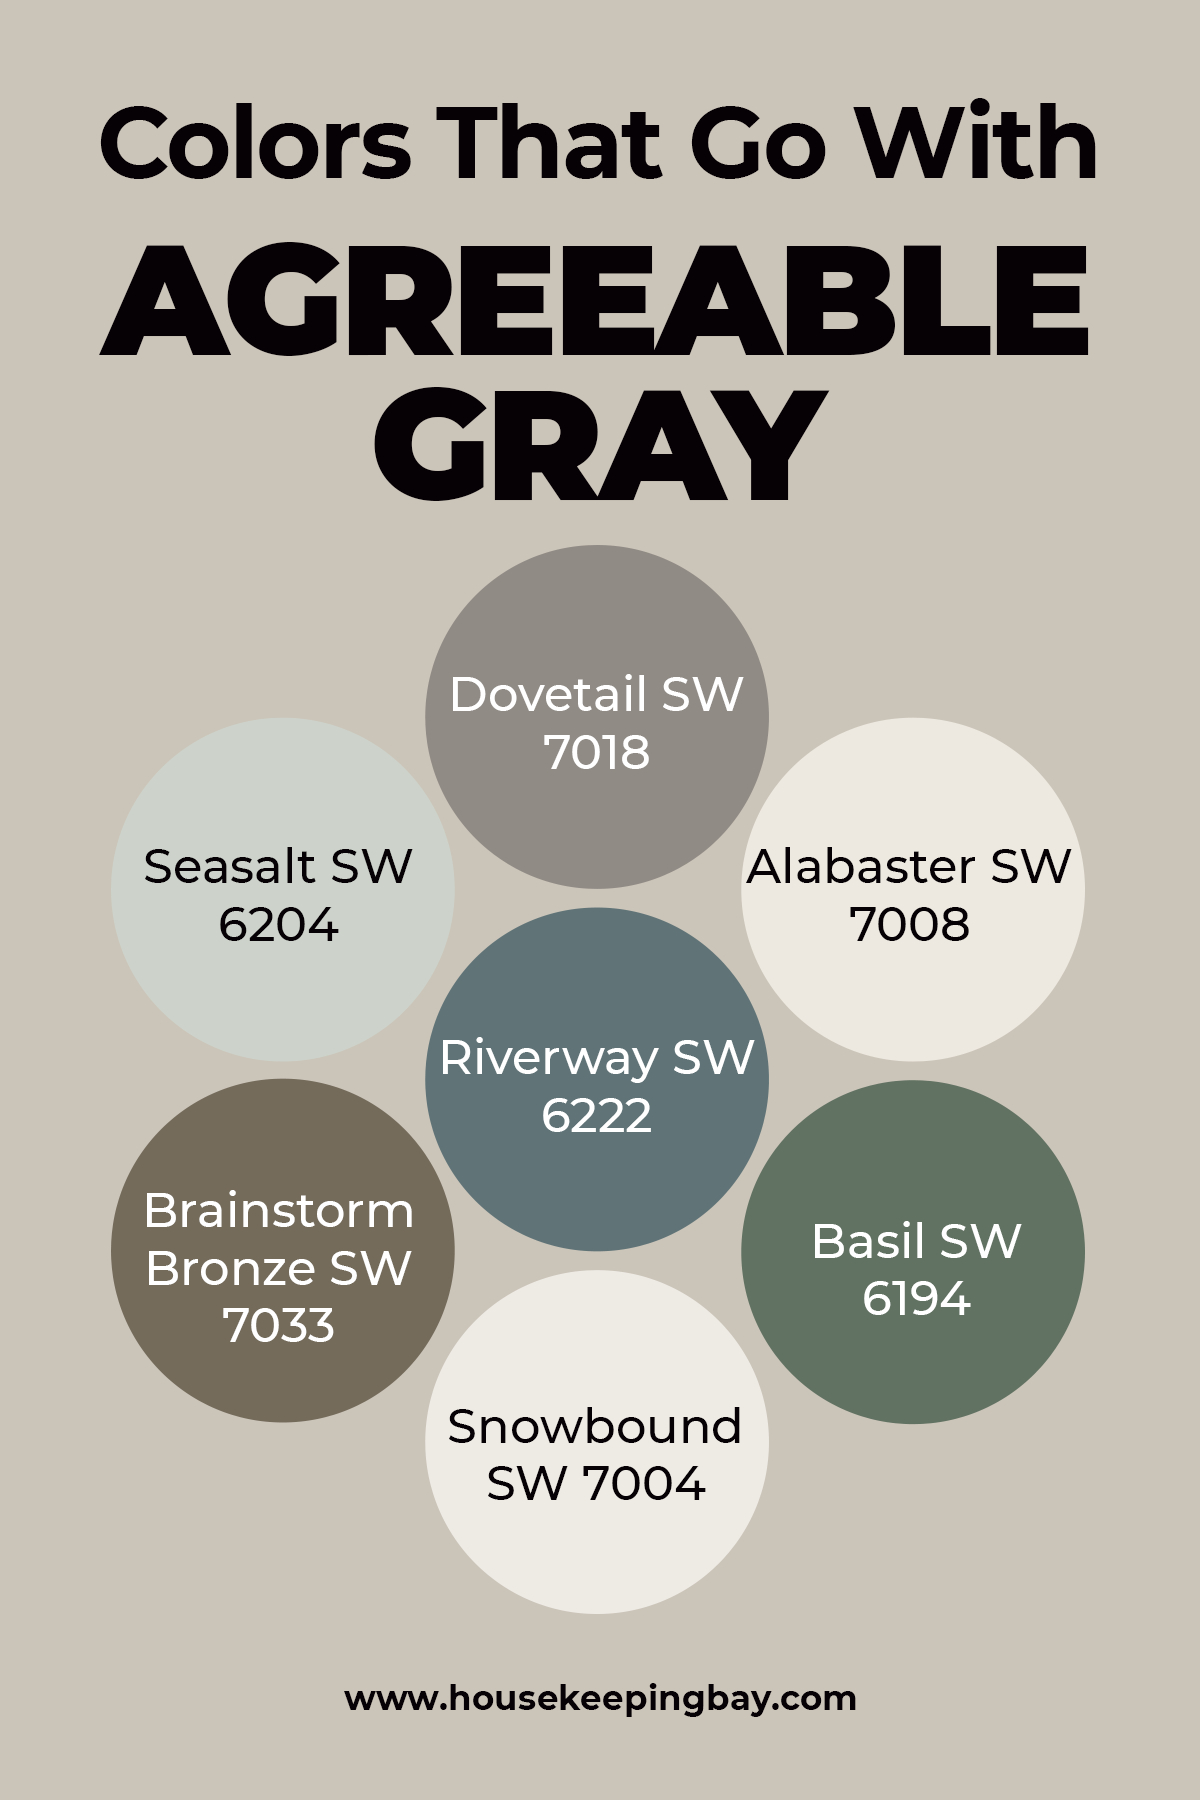 Colors That Go With Agreeable Gray